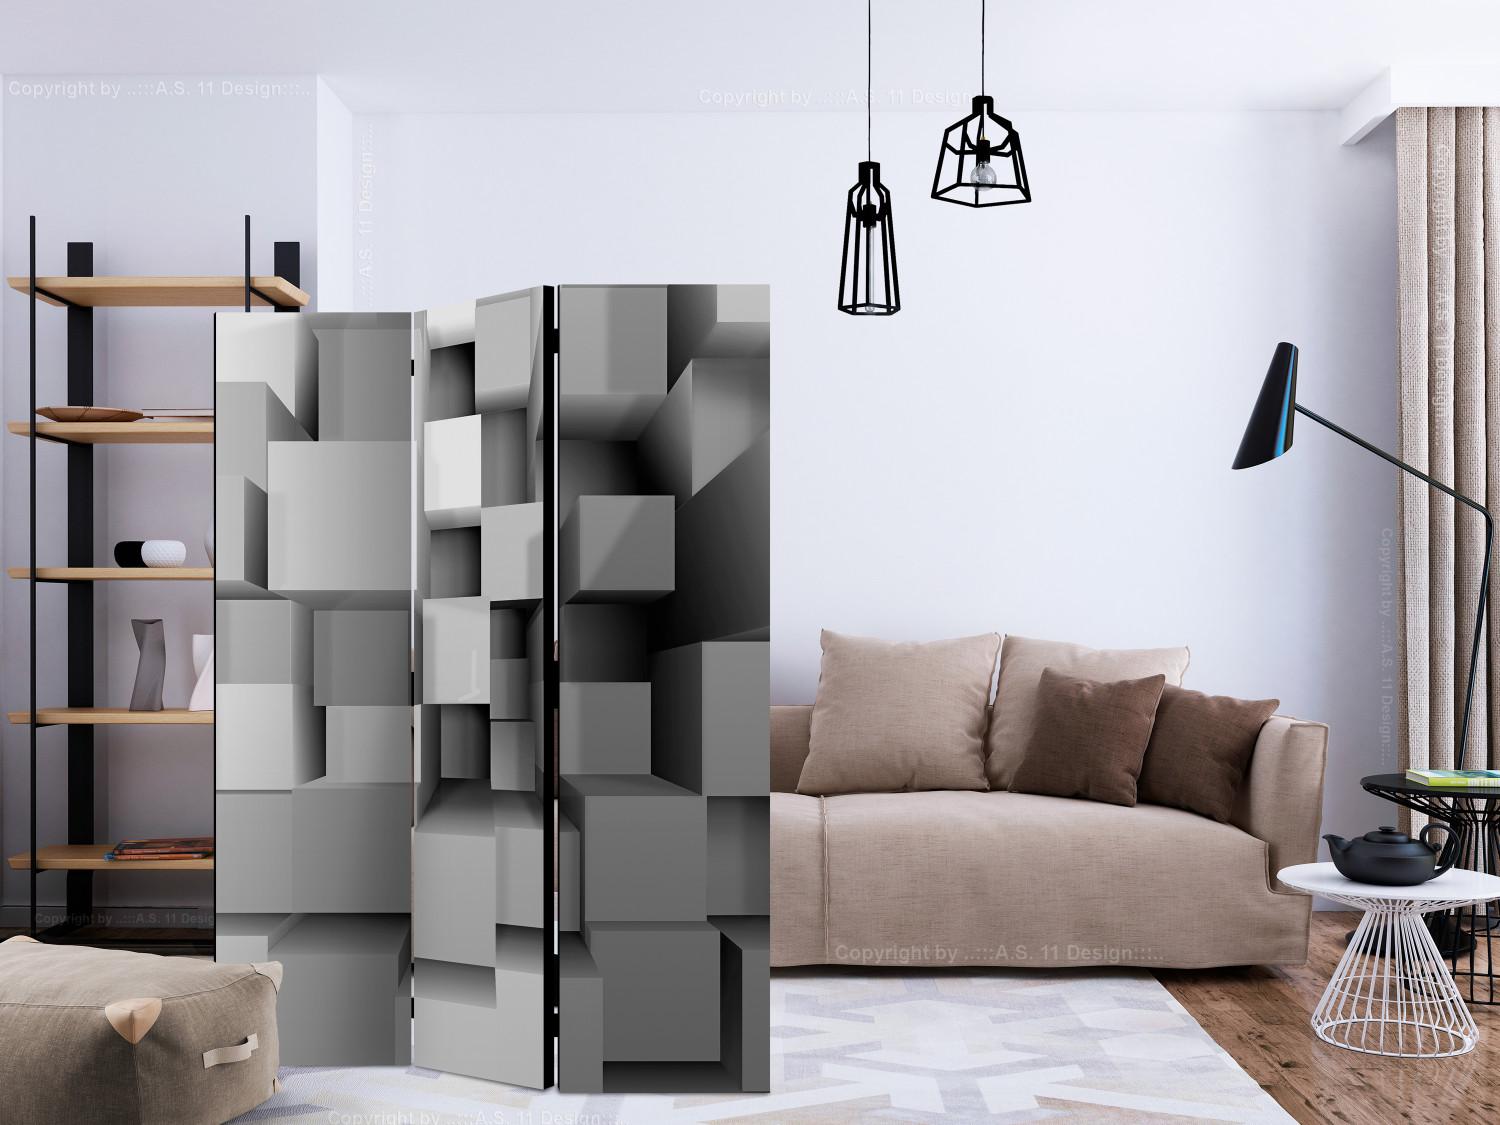 Room Divider Mechanical Symmetry - abstraction of geometric figures with 3D effect